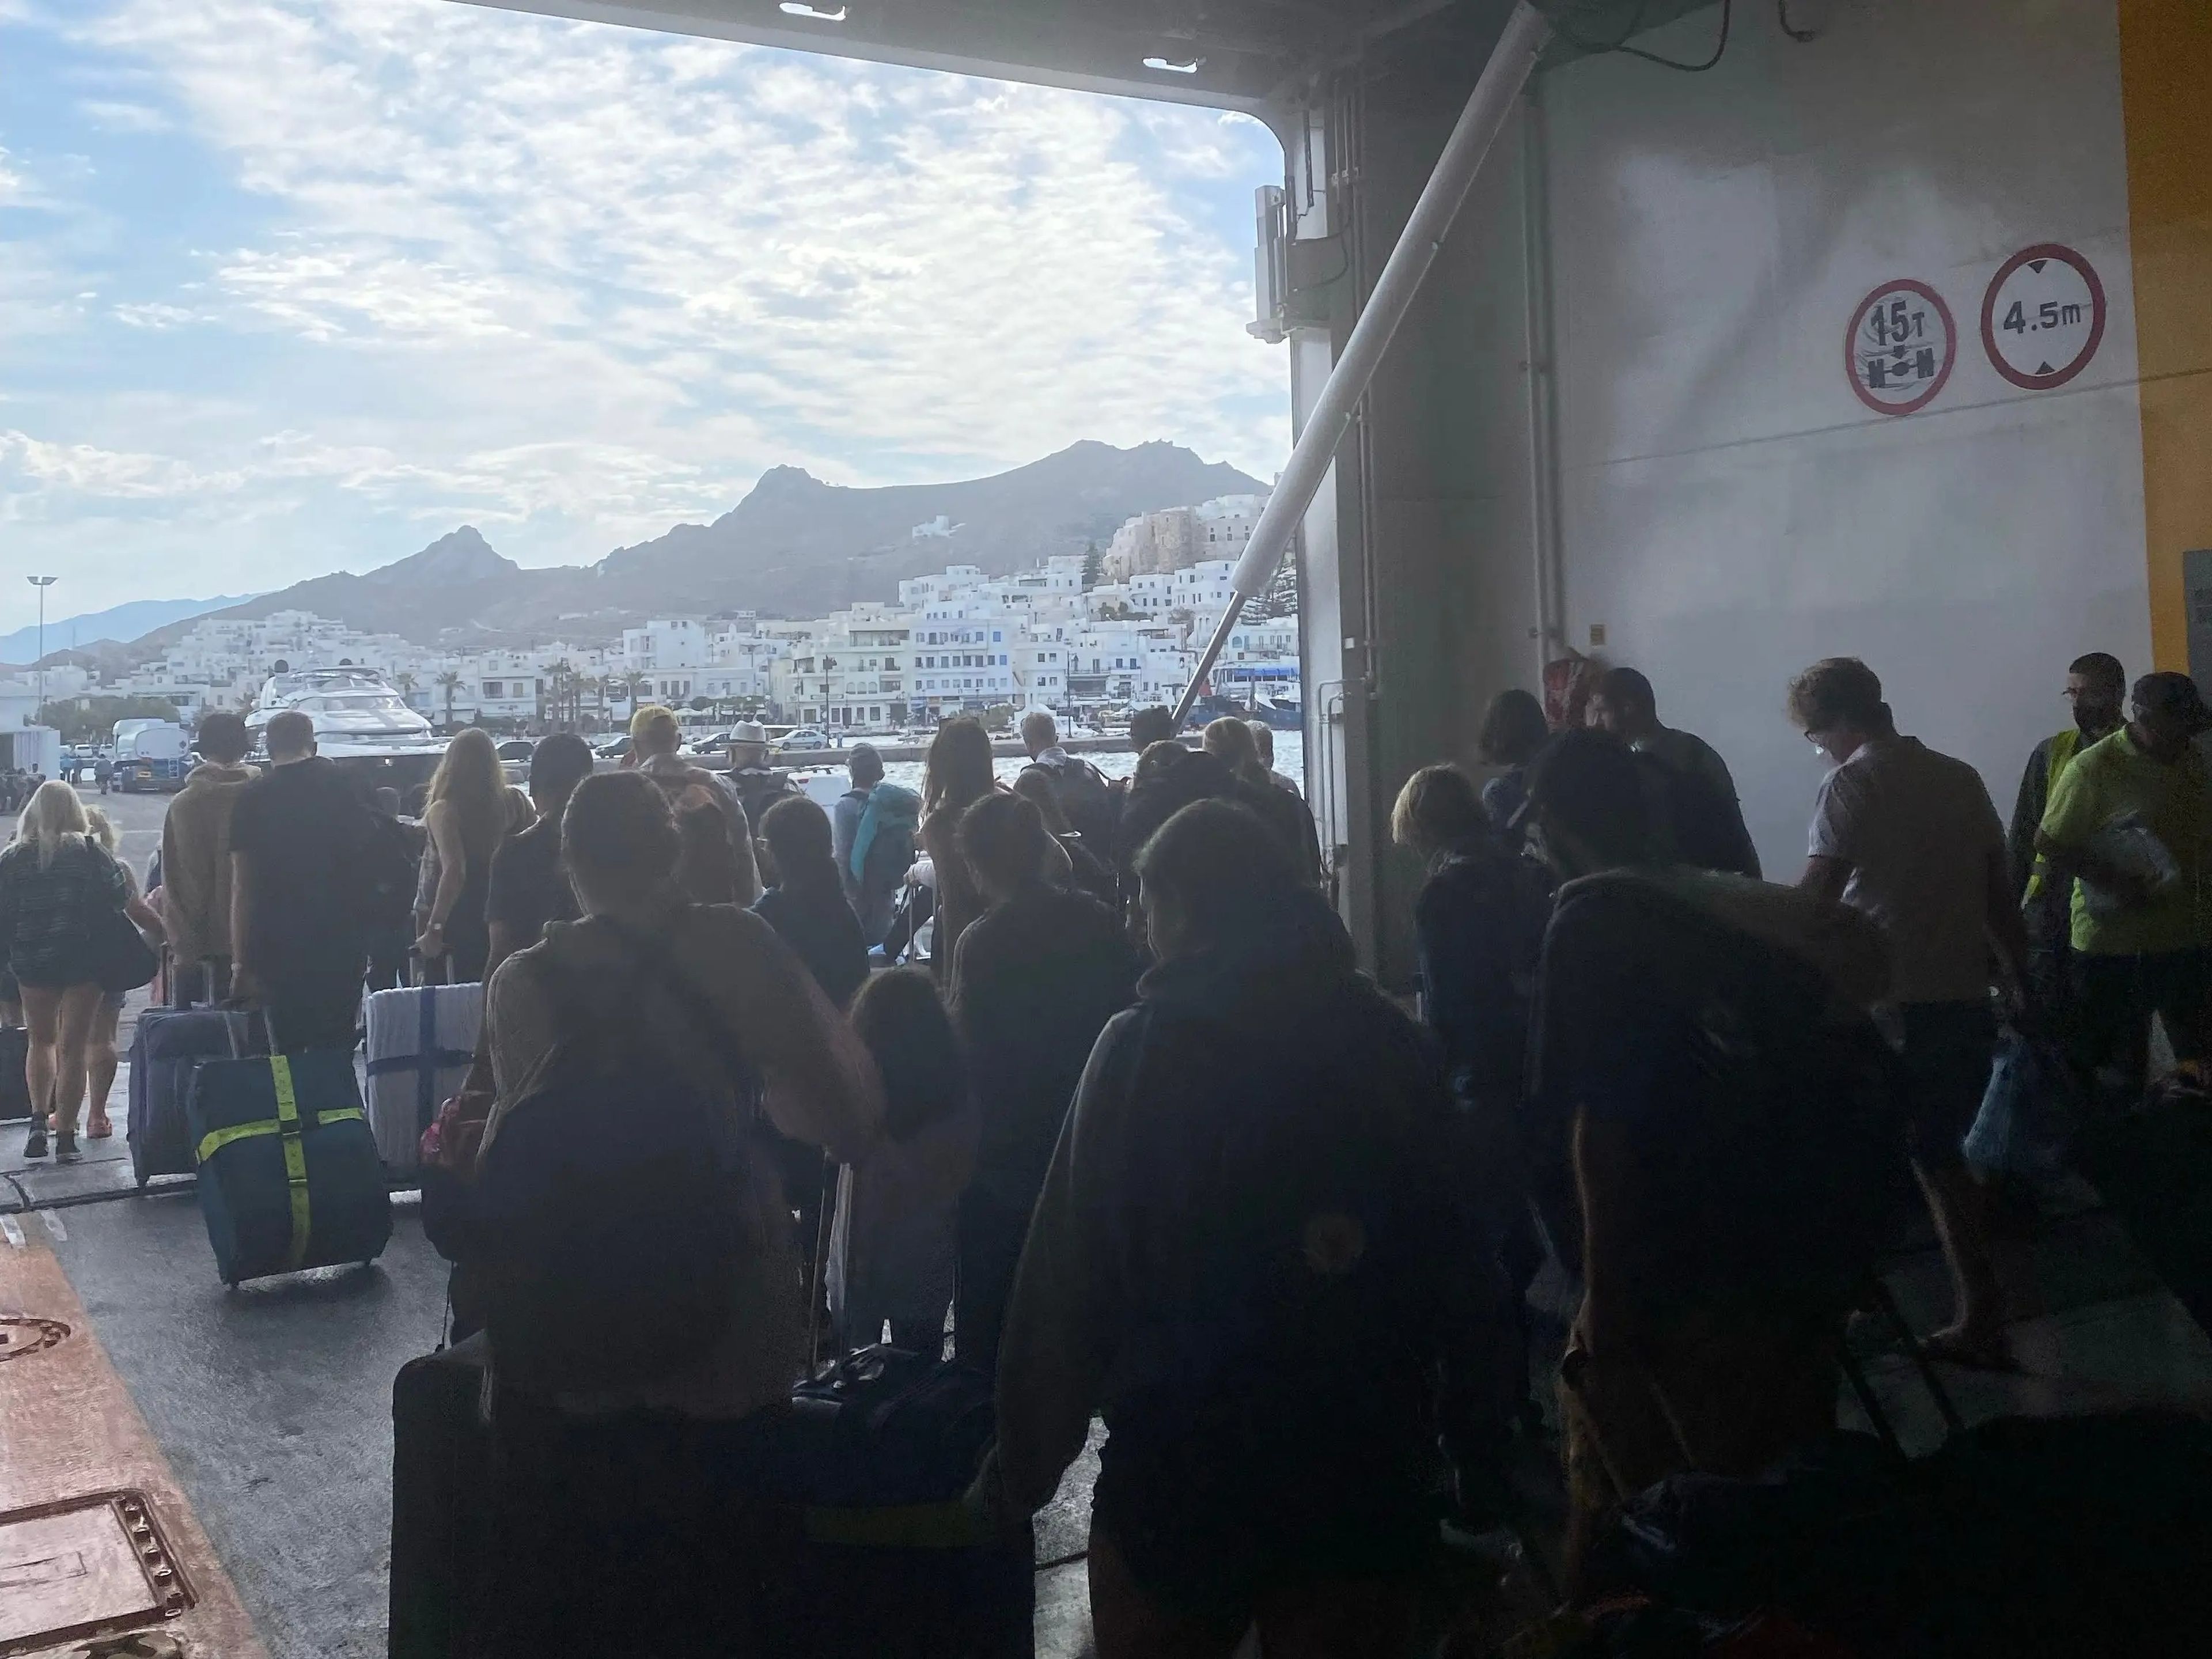 crowds exiting a ferry in greece